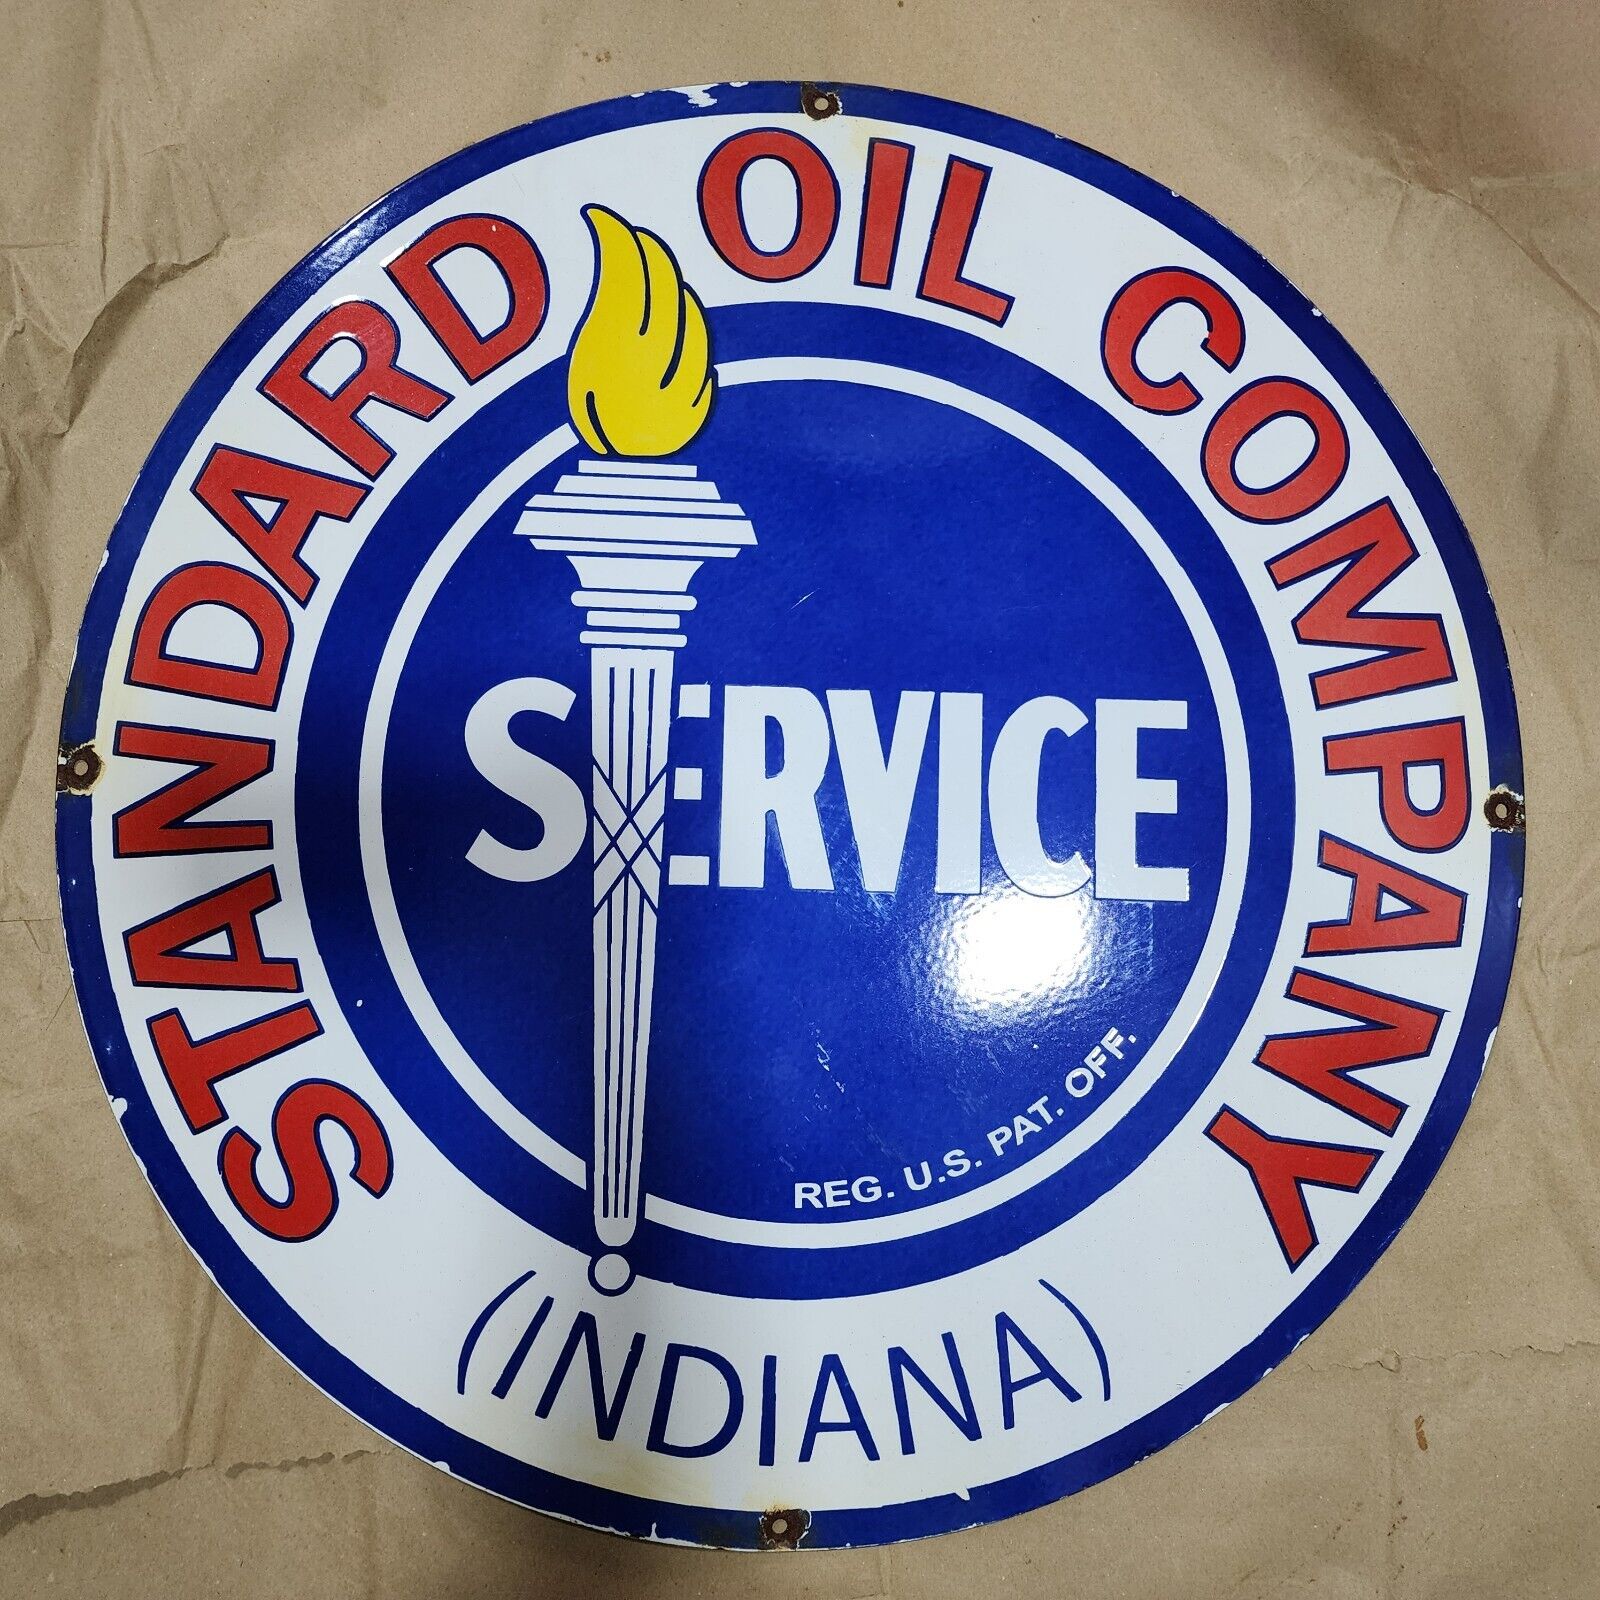 STANDARD OIL CO. PORCELAIN ENAMEL SIGN 30 INCHES ROUND